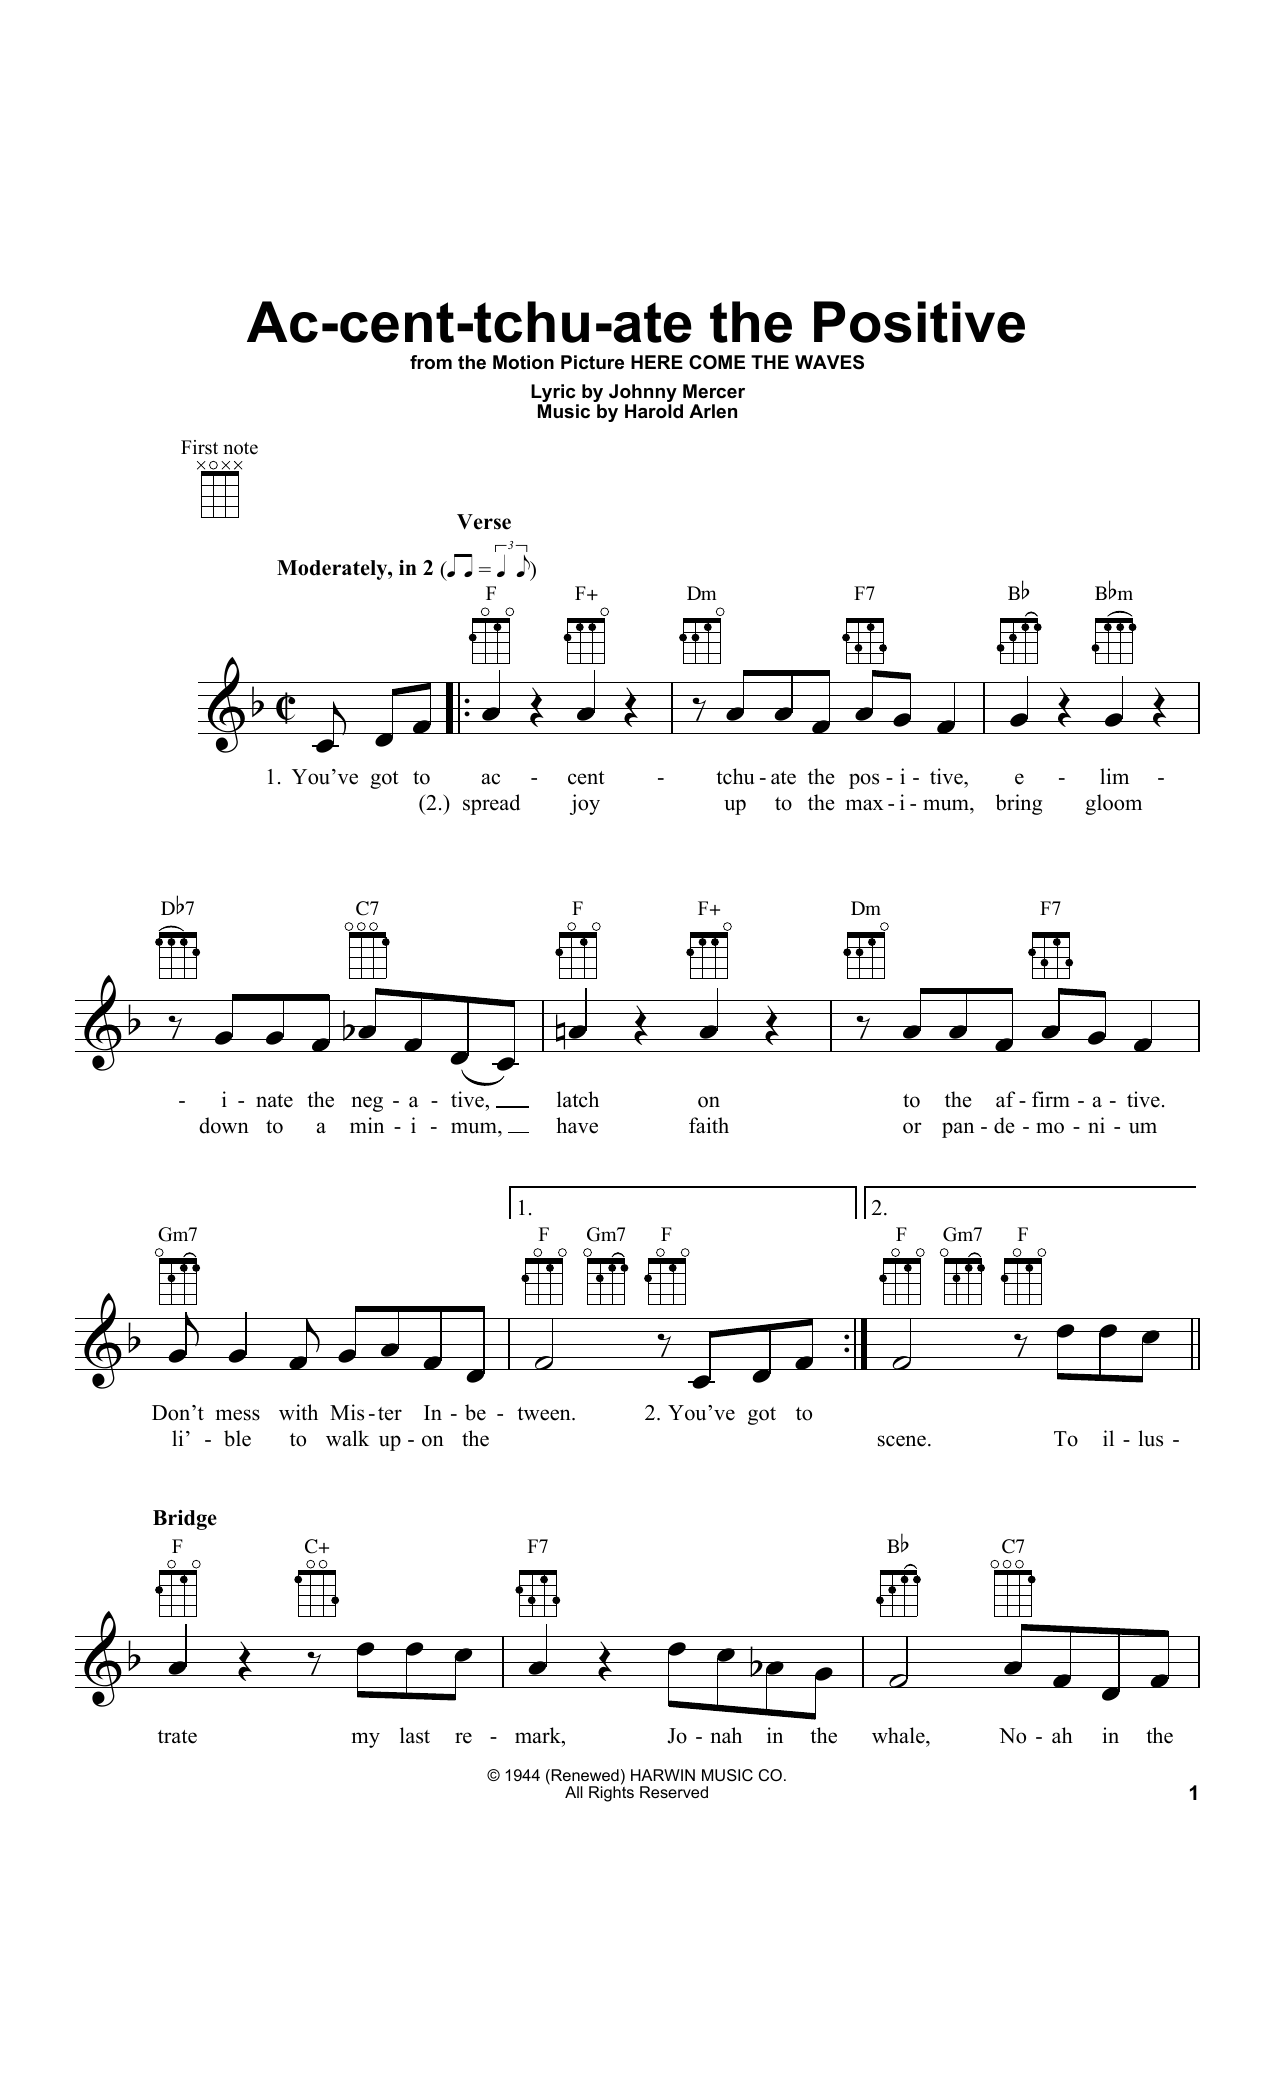 Download Johnny Mercer Ac-cent-tchu-ate The Positive Sheet Music